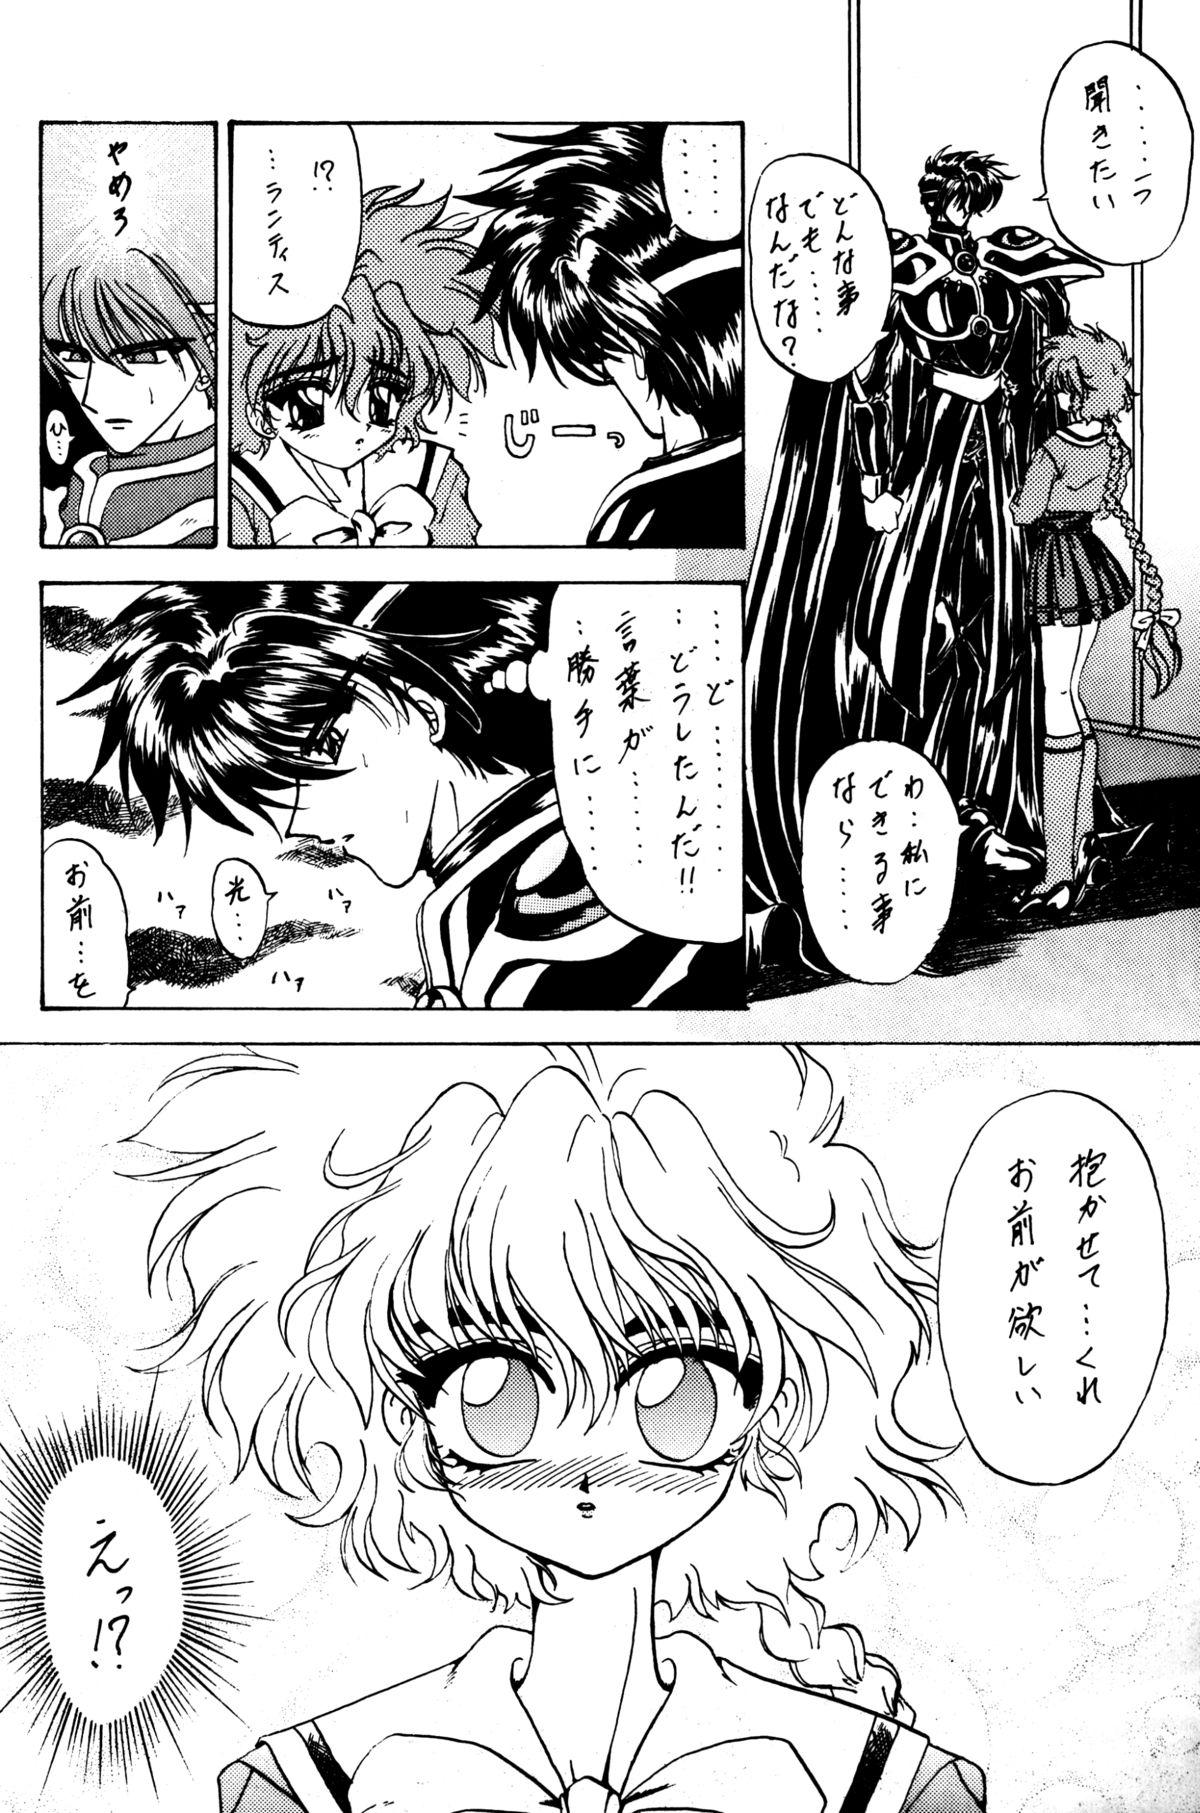 Freaky Stale World II - Magic knight rayearth Friends - Page 7